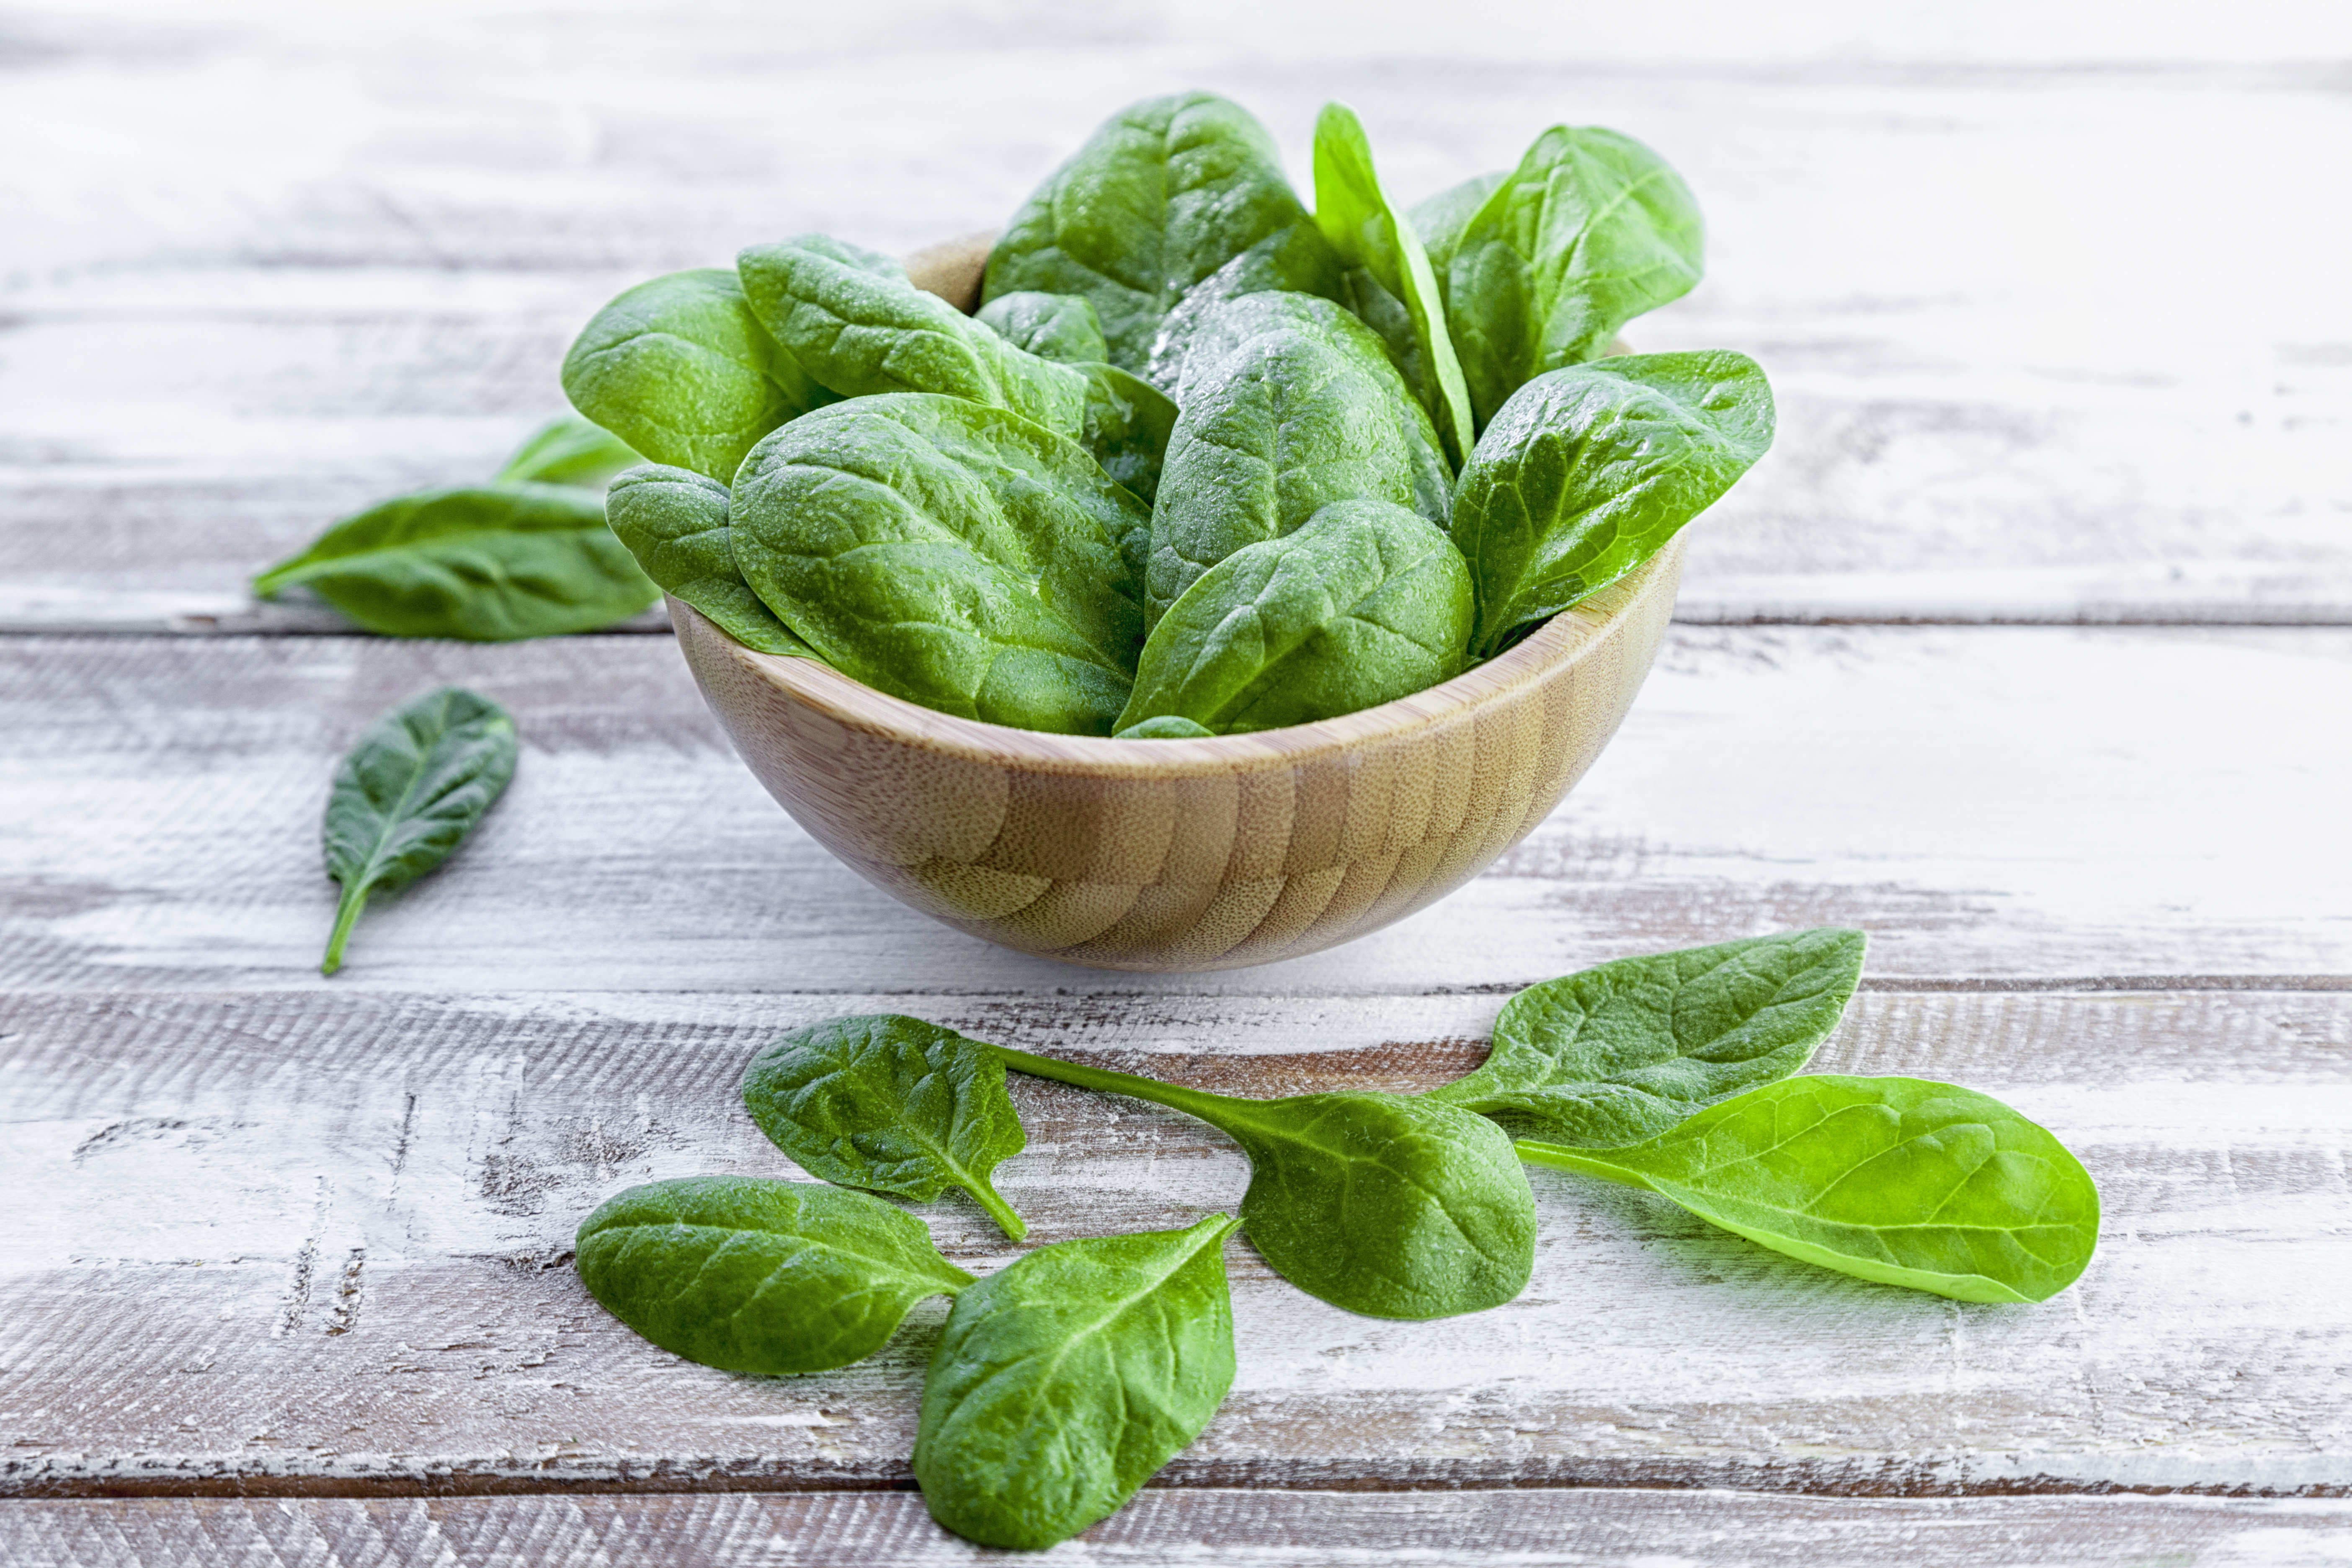 Baby spinach is tastier than regular spinach and is an easy way to pack nutrients into your child's meal